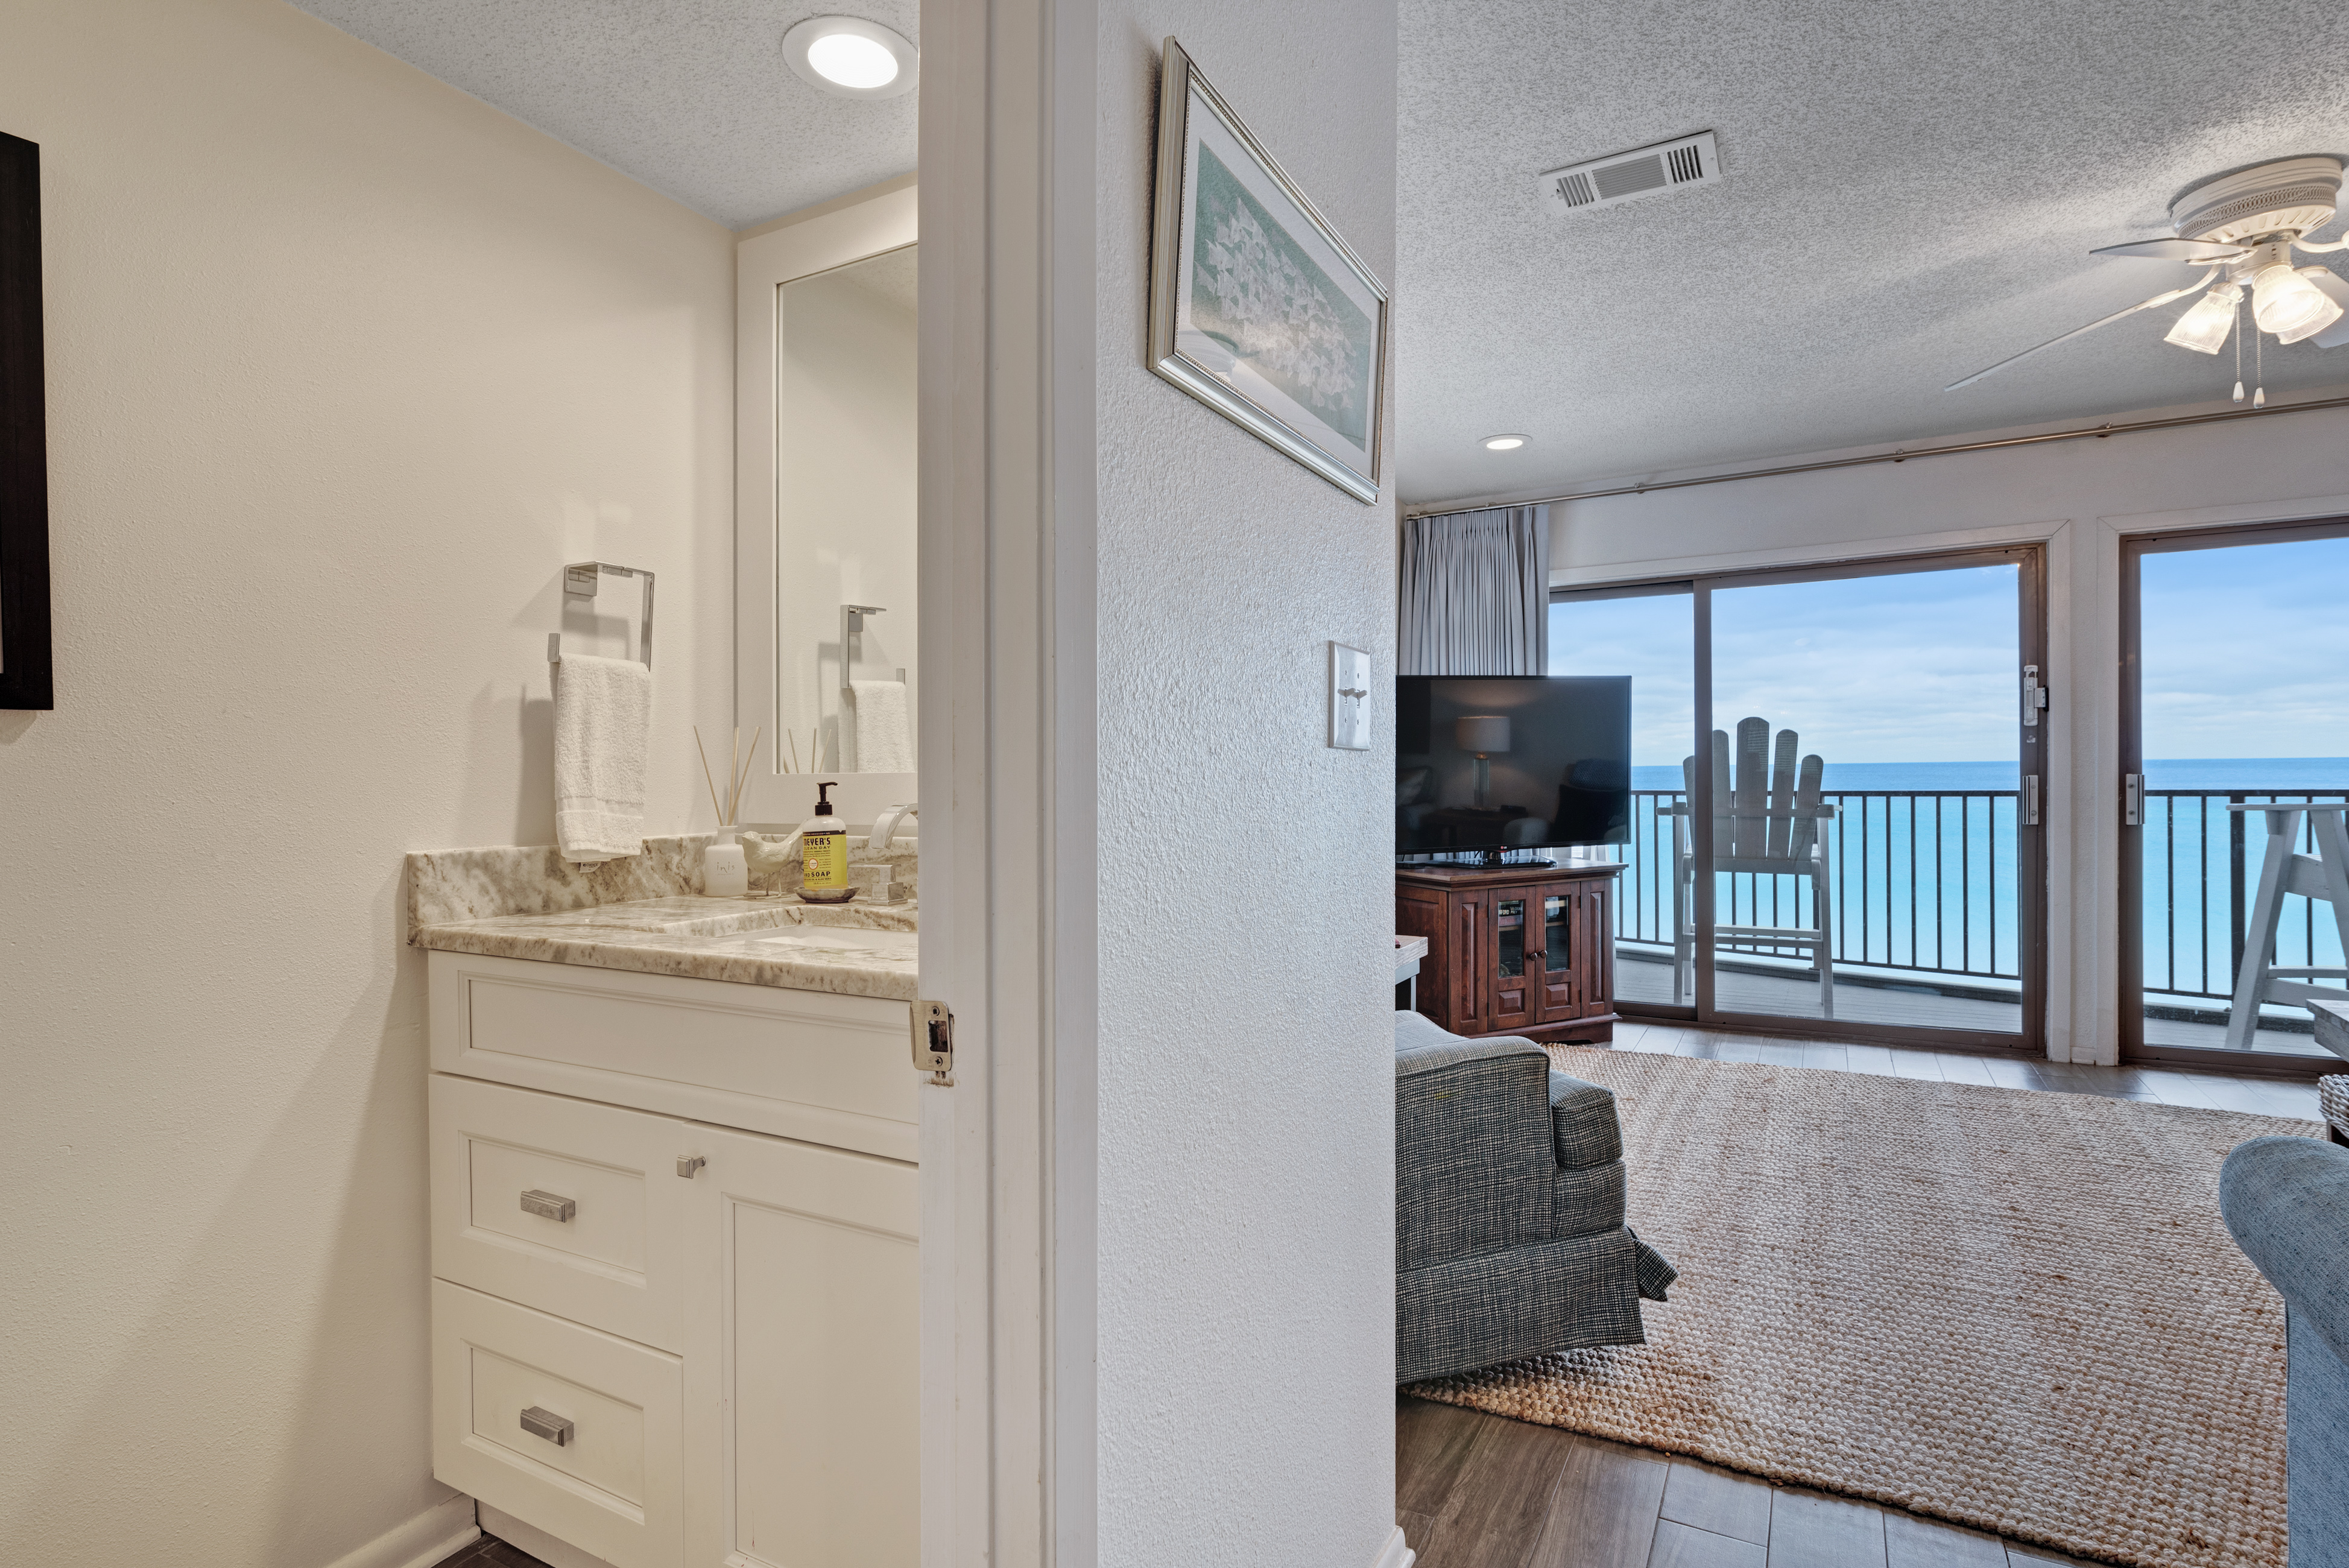 Blue Mountain Beach - 216 Blue Mountain Road Unit 1B Condo rental in Other 30a Condo Rentals in Highway 30-A Florida - #17